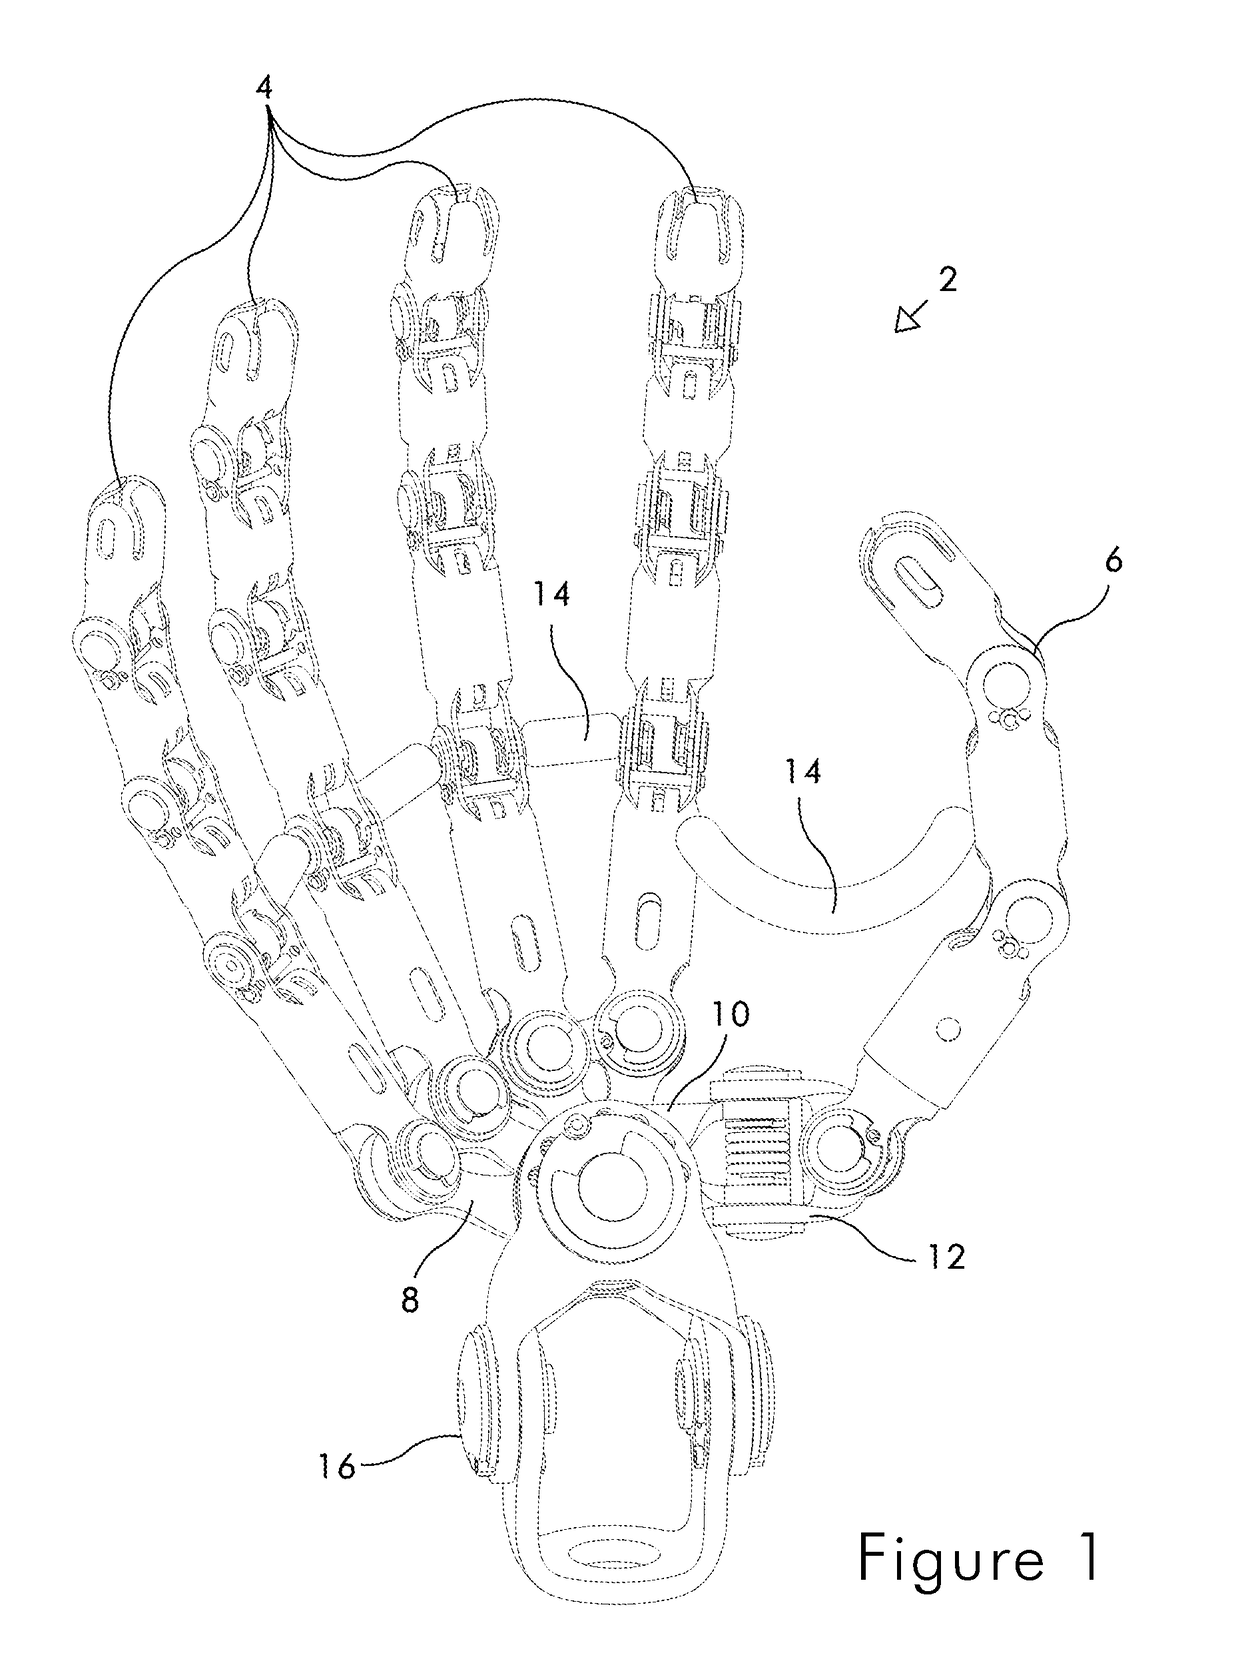 Mechanical grasping device